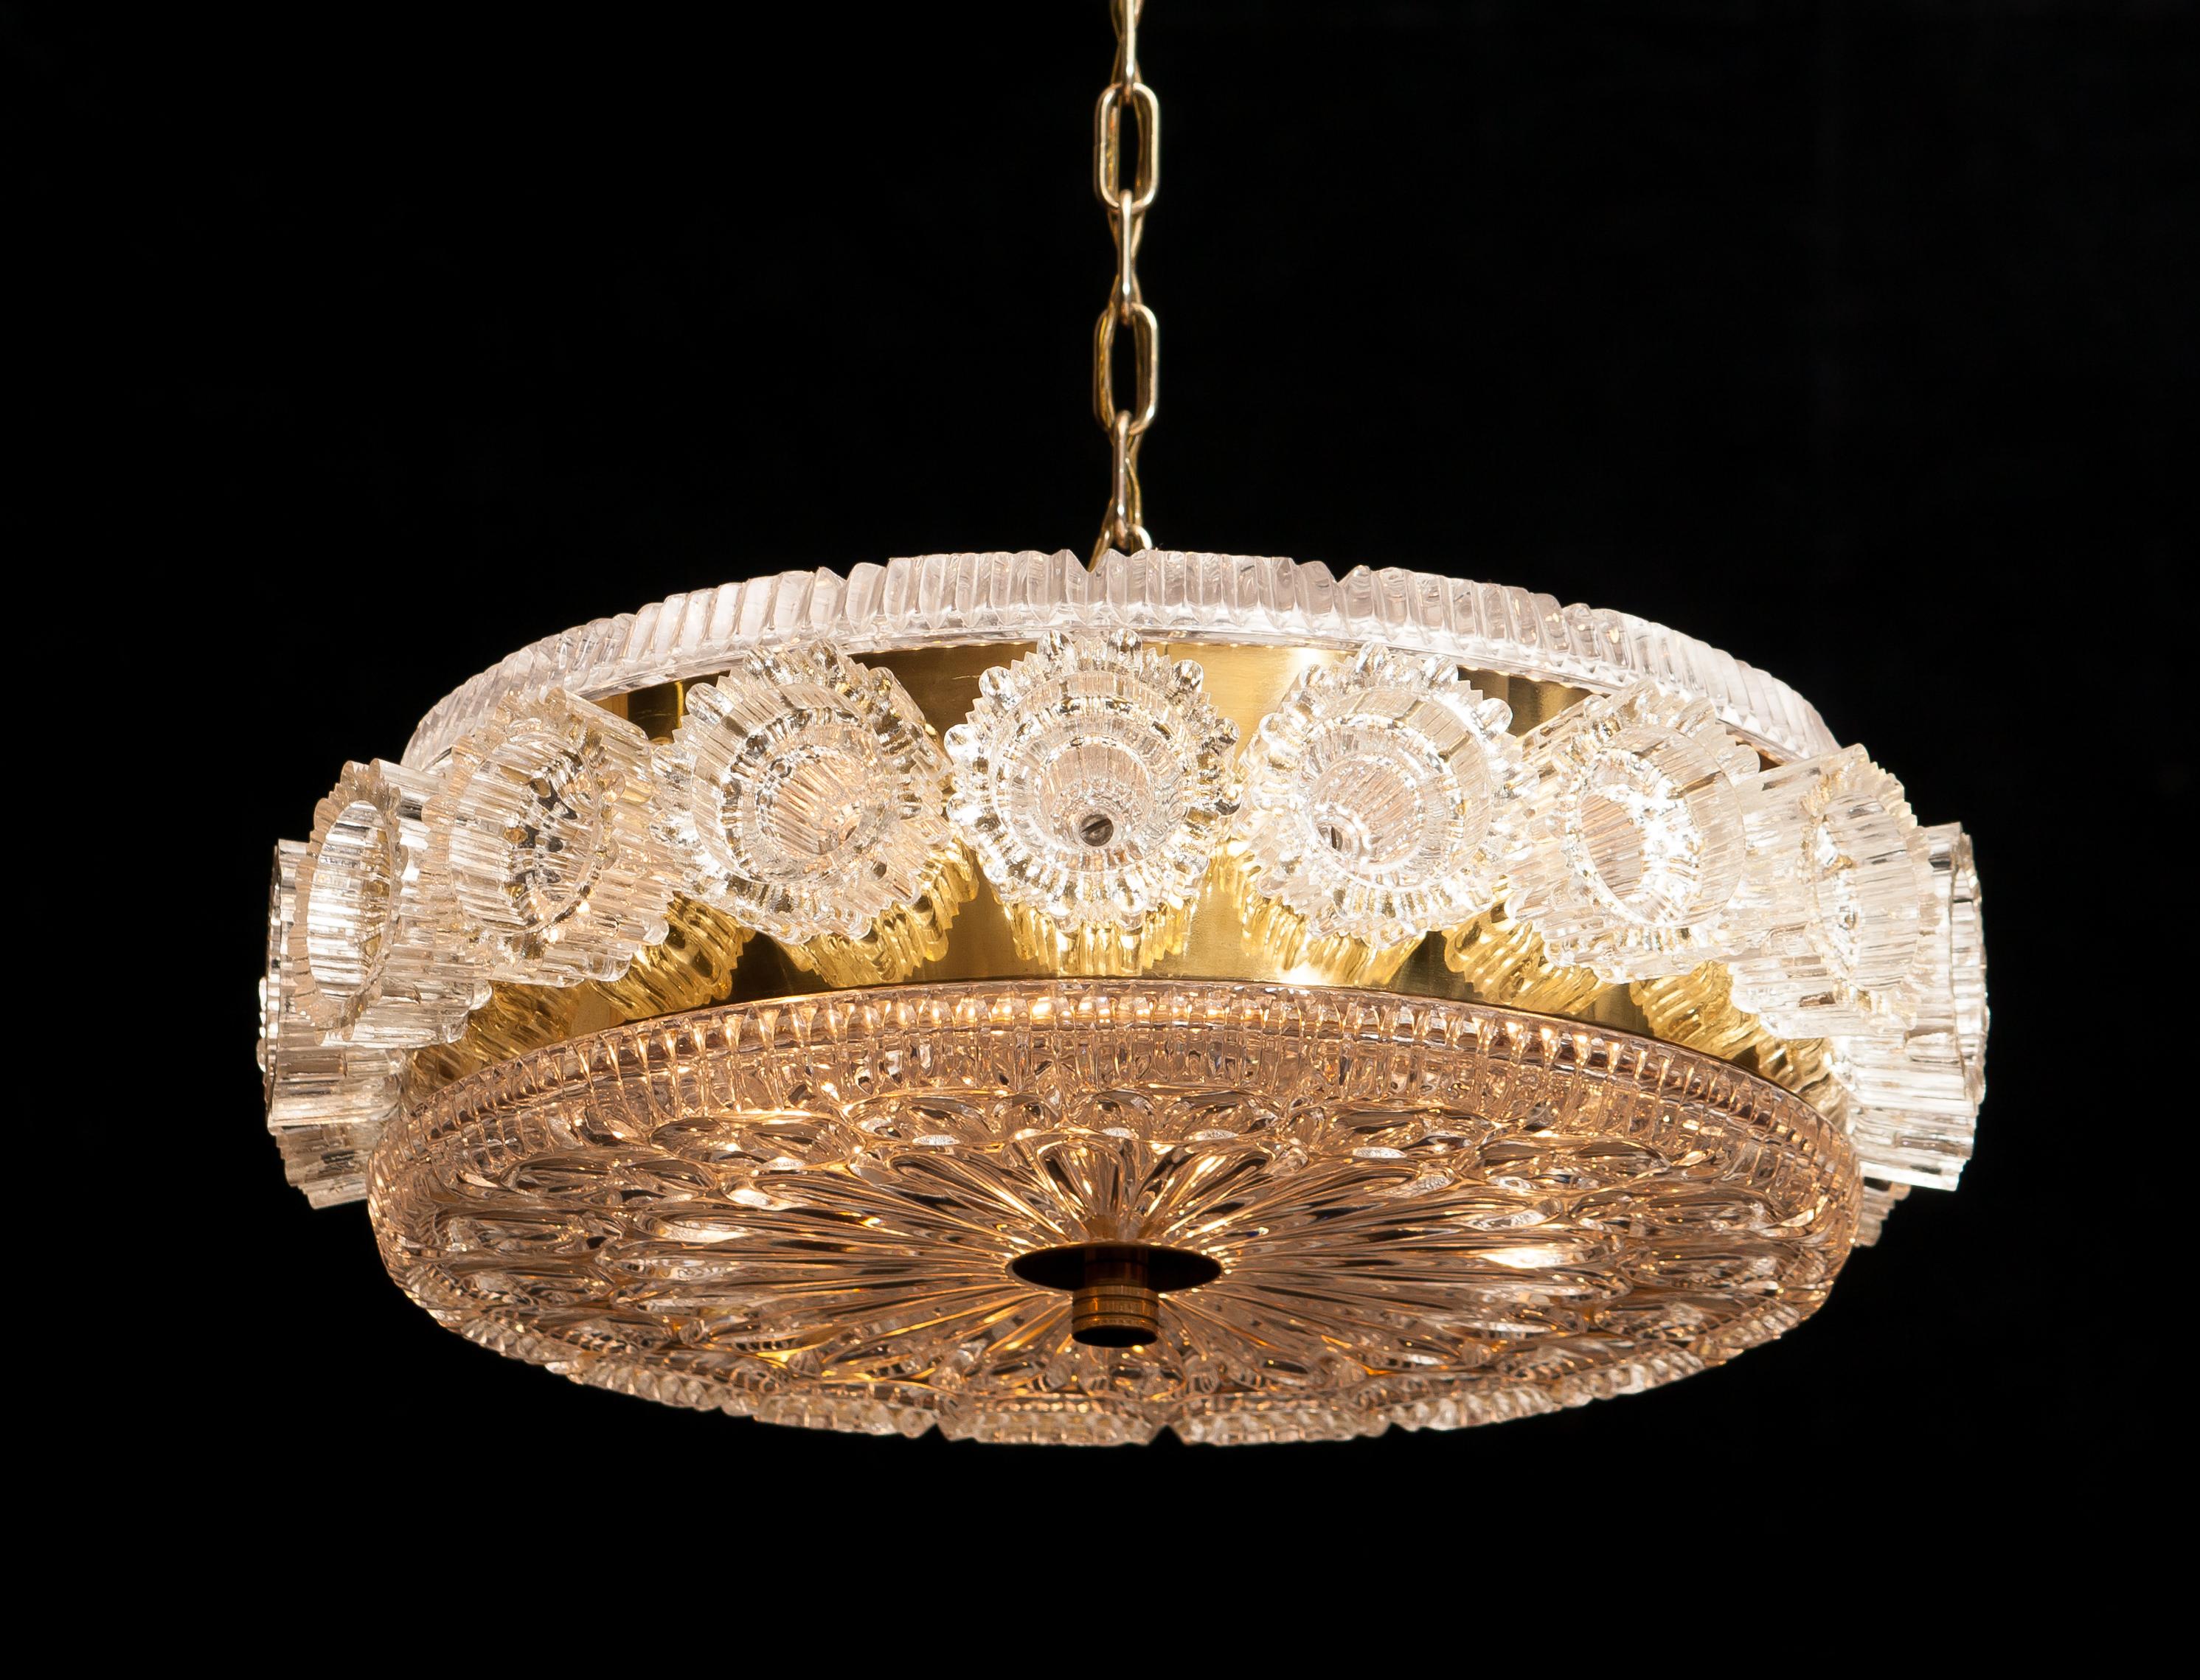 Beautiful lamp designed by Carl Fagerlund for Orrefors Sweden.
This pendant is made of brass and lovely 'flowers' of glass on the edge.
The total height is 112 cm but it is easy to make the chain shorter.
It is in a very nice condition.
Period